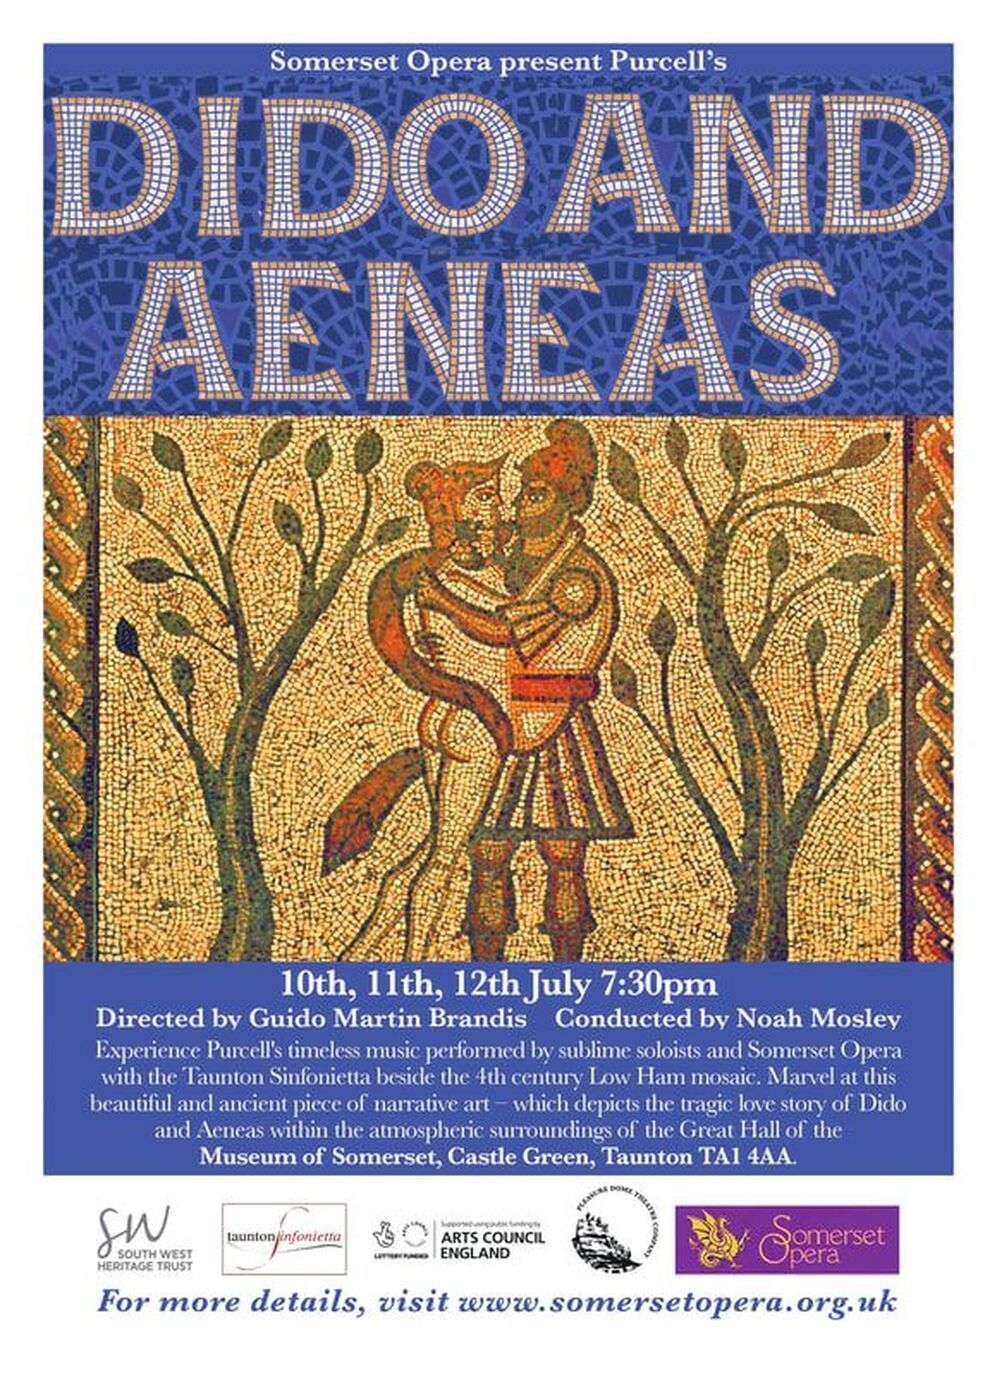 Dido and Aeneas by Somerset Opera